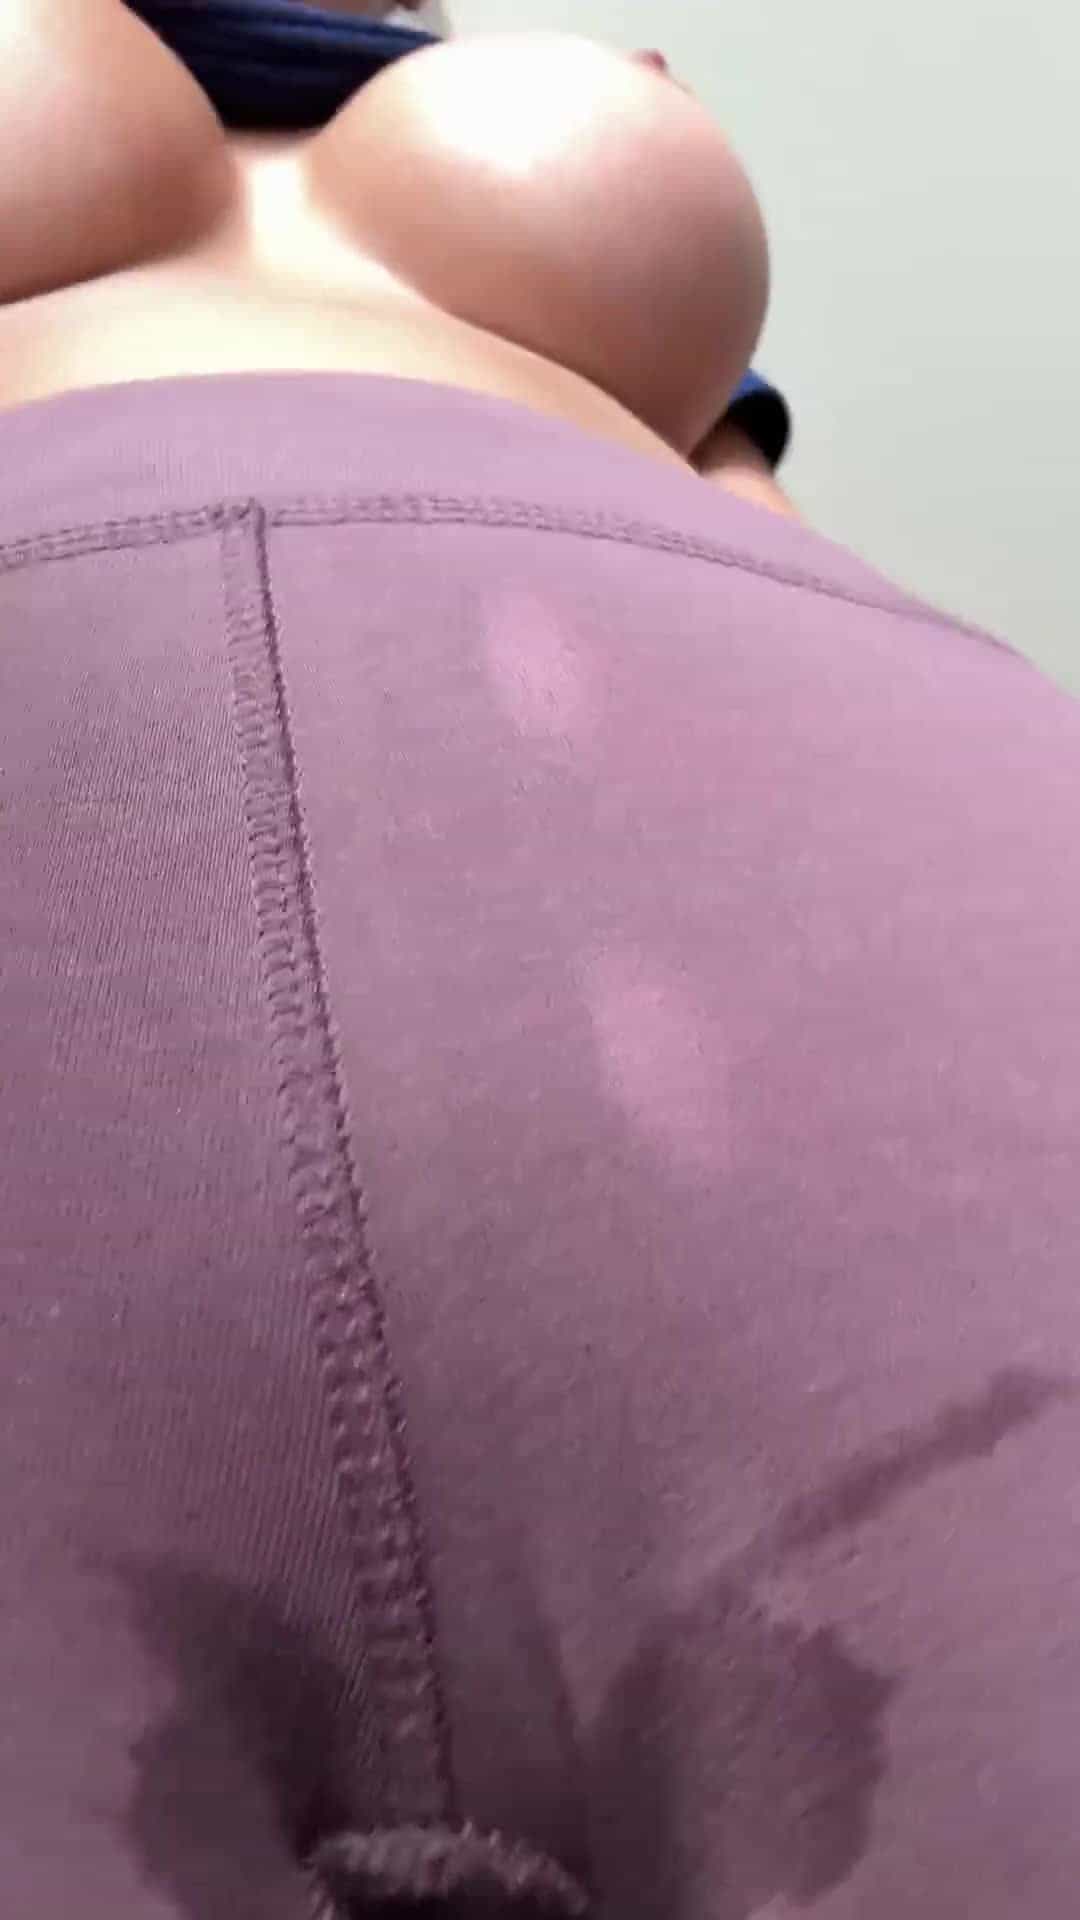 Here’s my post butt sweat from the gym :)